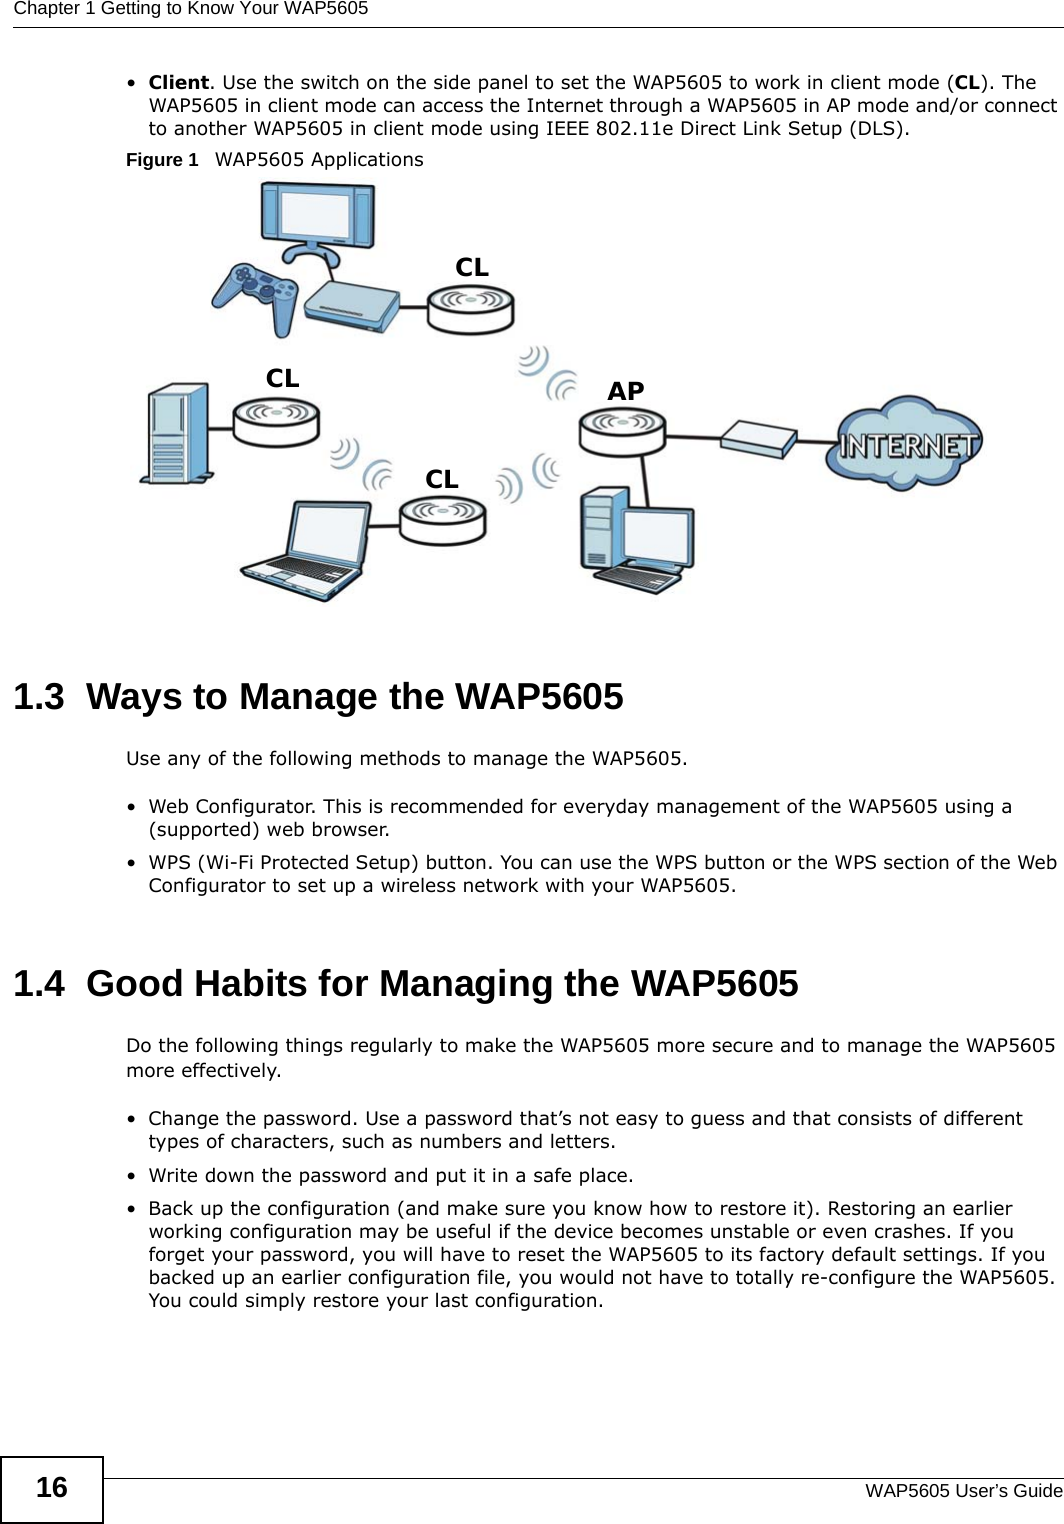 Chapter 1 Getting to Know Your WAP5605WAP5605 User’s Guide16•Client. Use the switch on the side panel to set the WAP5605 to work in client mode (CL). The WAP5605 in client mode can access the Internet through a WAP5605 in AP mode and/or connect to another WAP5605 in client mode using IEEE 802.11e Direct Link Setup (DLS). Figure 1   WAP5605 Applications 1.3  Ways to Manage the WAP5605Use any of the following methods to manage the WAP5605.• Web Configurator. This is recommended for everyday management of the WAP5605 using a (supported) web browser.• WPS (Wi-Fi Protected Setup) button. You can use the WPS button or the WPS section of the Web Configurator to set up a wireless network with your WAP5605.1.4  Good Habits for Managing the WAP5605Do the following things regularly to make the WAP5605 more secure and to manage the WAP5605 more effectively.• Change the password. Use a password that’s not easy to guess and that consists of different types of characters, such as numbers and letters.• Write down the password and put it in a safe place.• Back up the configuration (and make sure you know how to restore it). Restoring an earlier working configuration may be useful if the device becomes unstable or even crashes. If you forget your password, you will have to reset the WAP5605 to its factory default settings. If you backed up an earlier configuration file, you would not have to totally re-configure the WAP5605. You could simply restore your last configuration.APCLCLCL